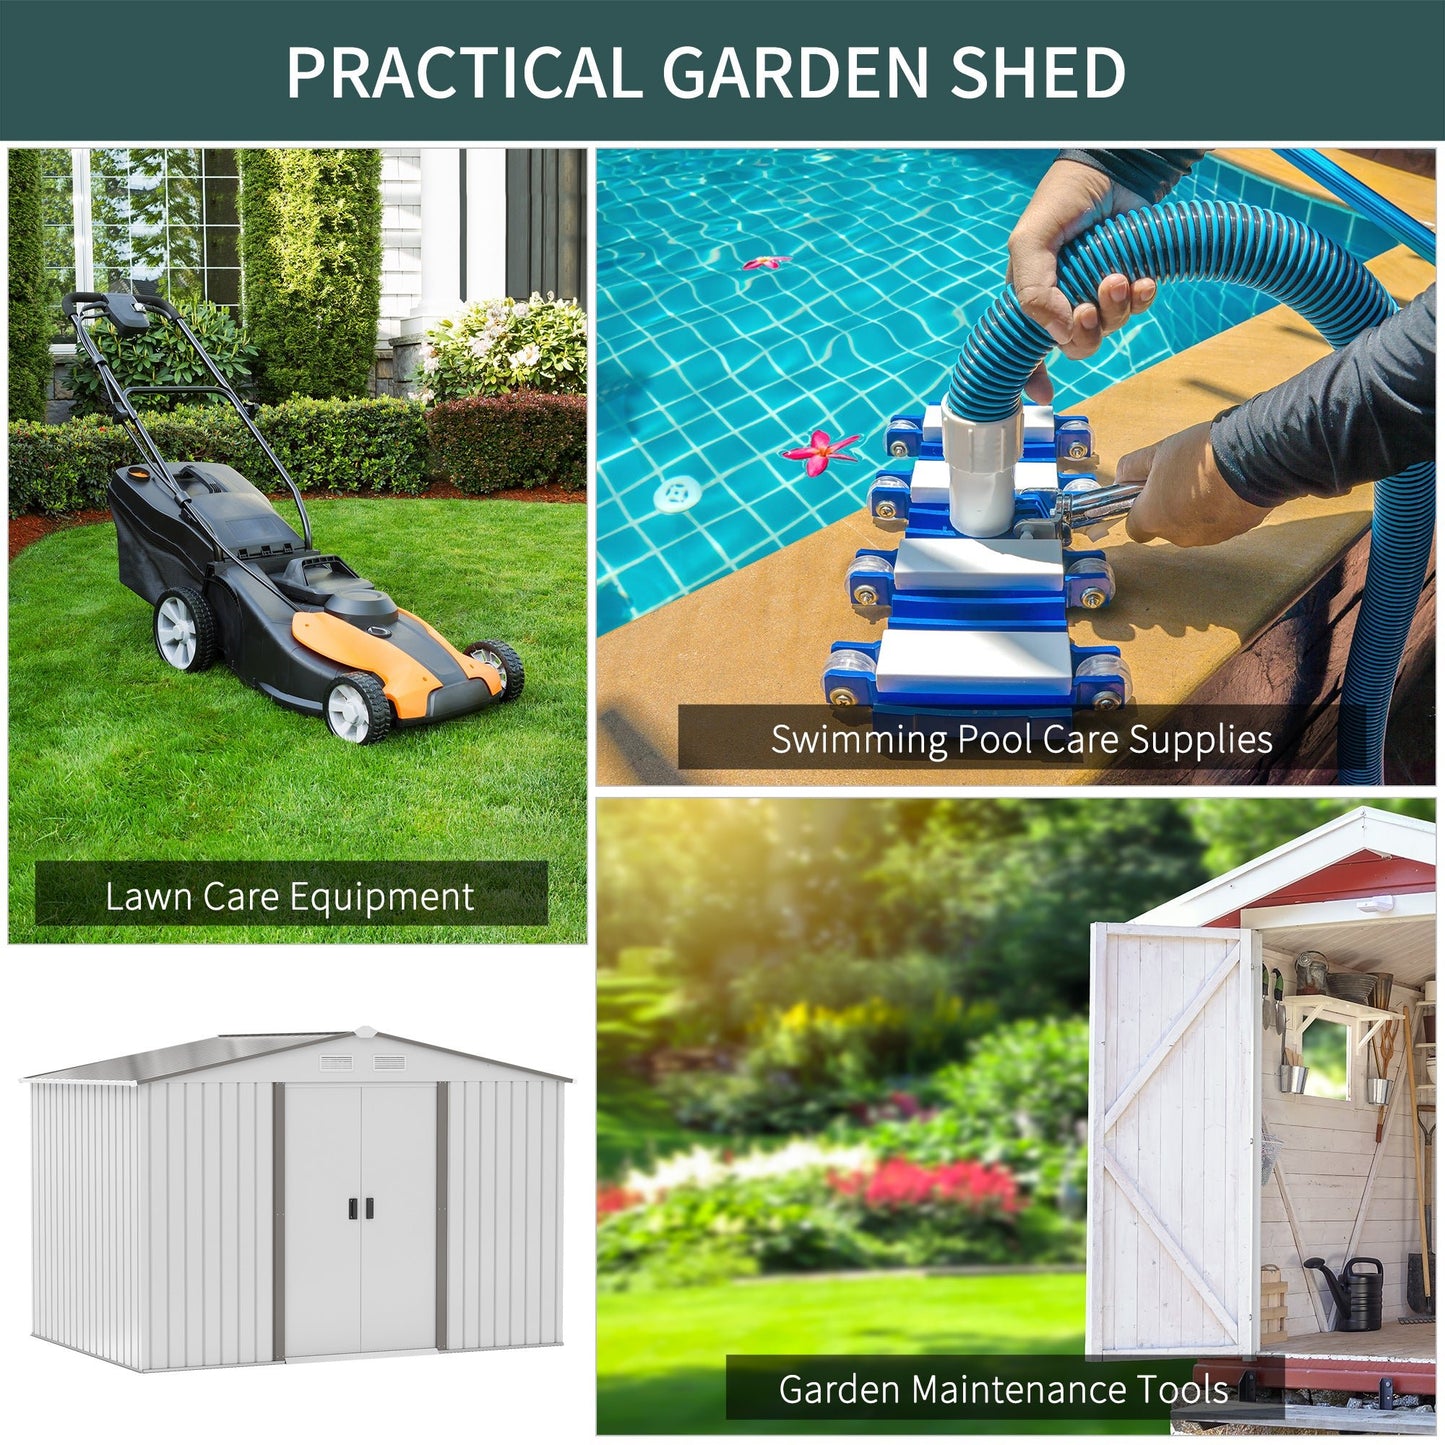 Outdoor and Garden-9' x 6' Metal Storage Shed Garden Tool House with Double Sliding Doors, 4 Air Vents for Backyard Garden Equipment, Lawnmower, Silver - Outdoor Style Company